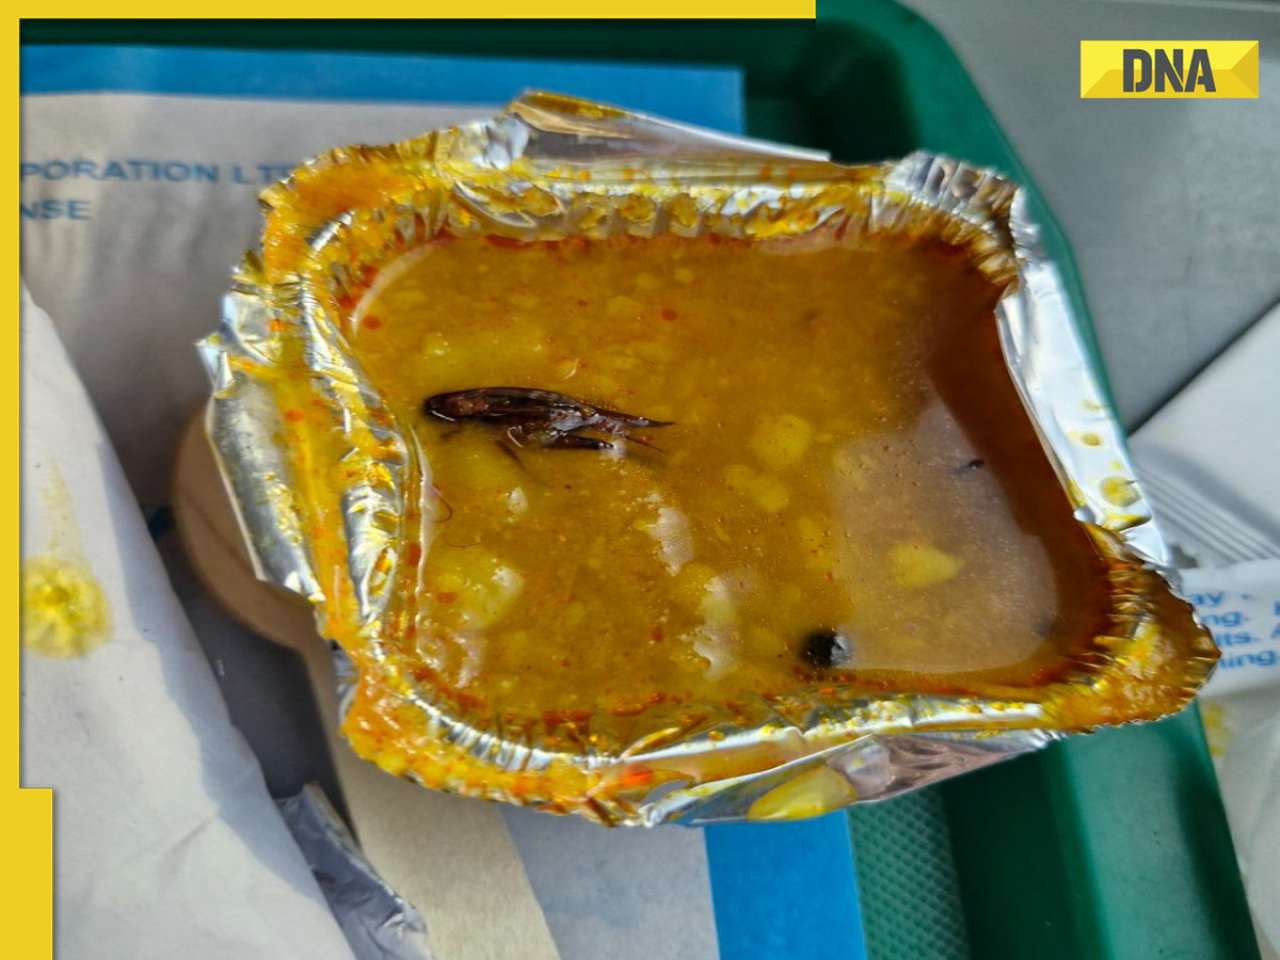 Vande Bharat Express passenger shares pic of cockroach in meal, IRCTC reacts